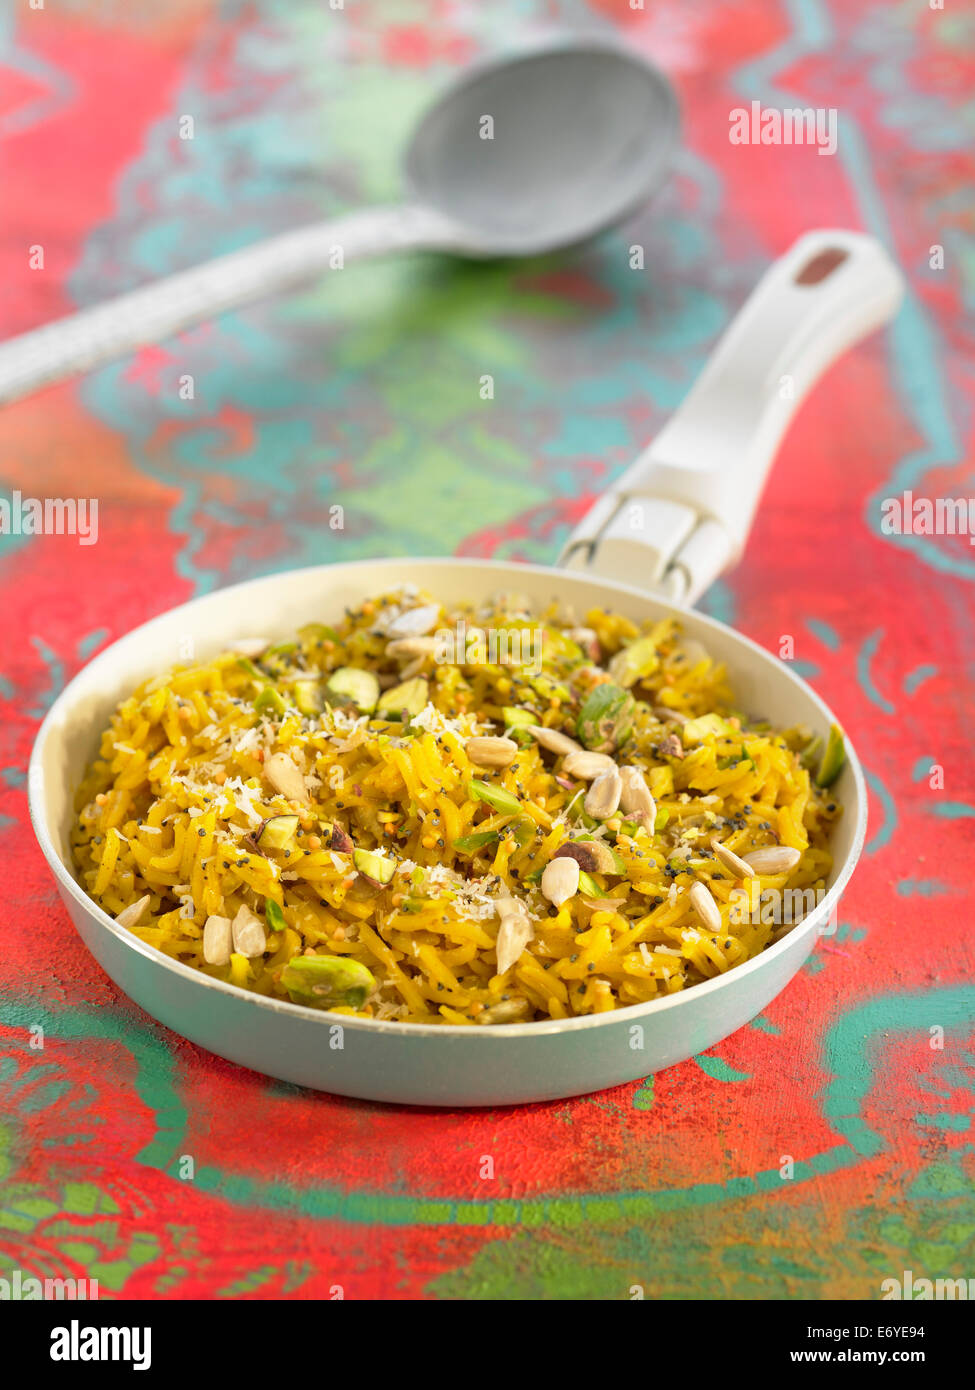 Sauteed rice with seeds and dried fruit Stock Photo